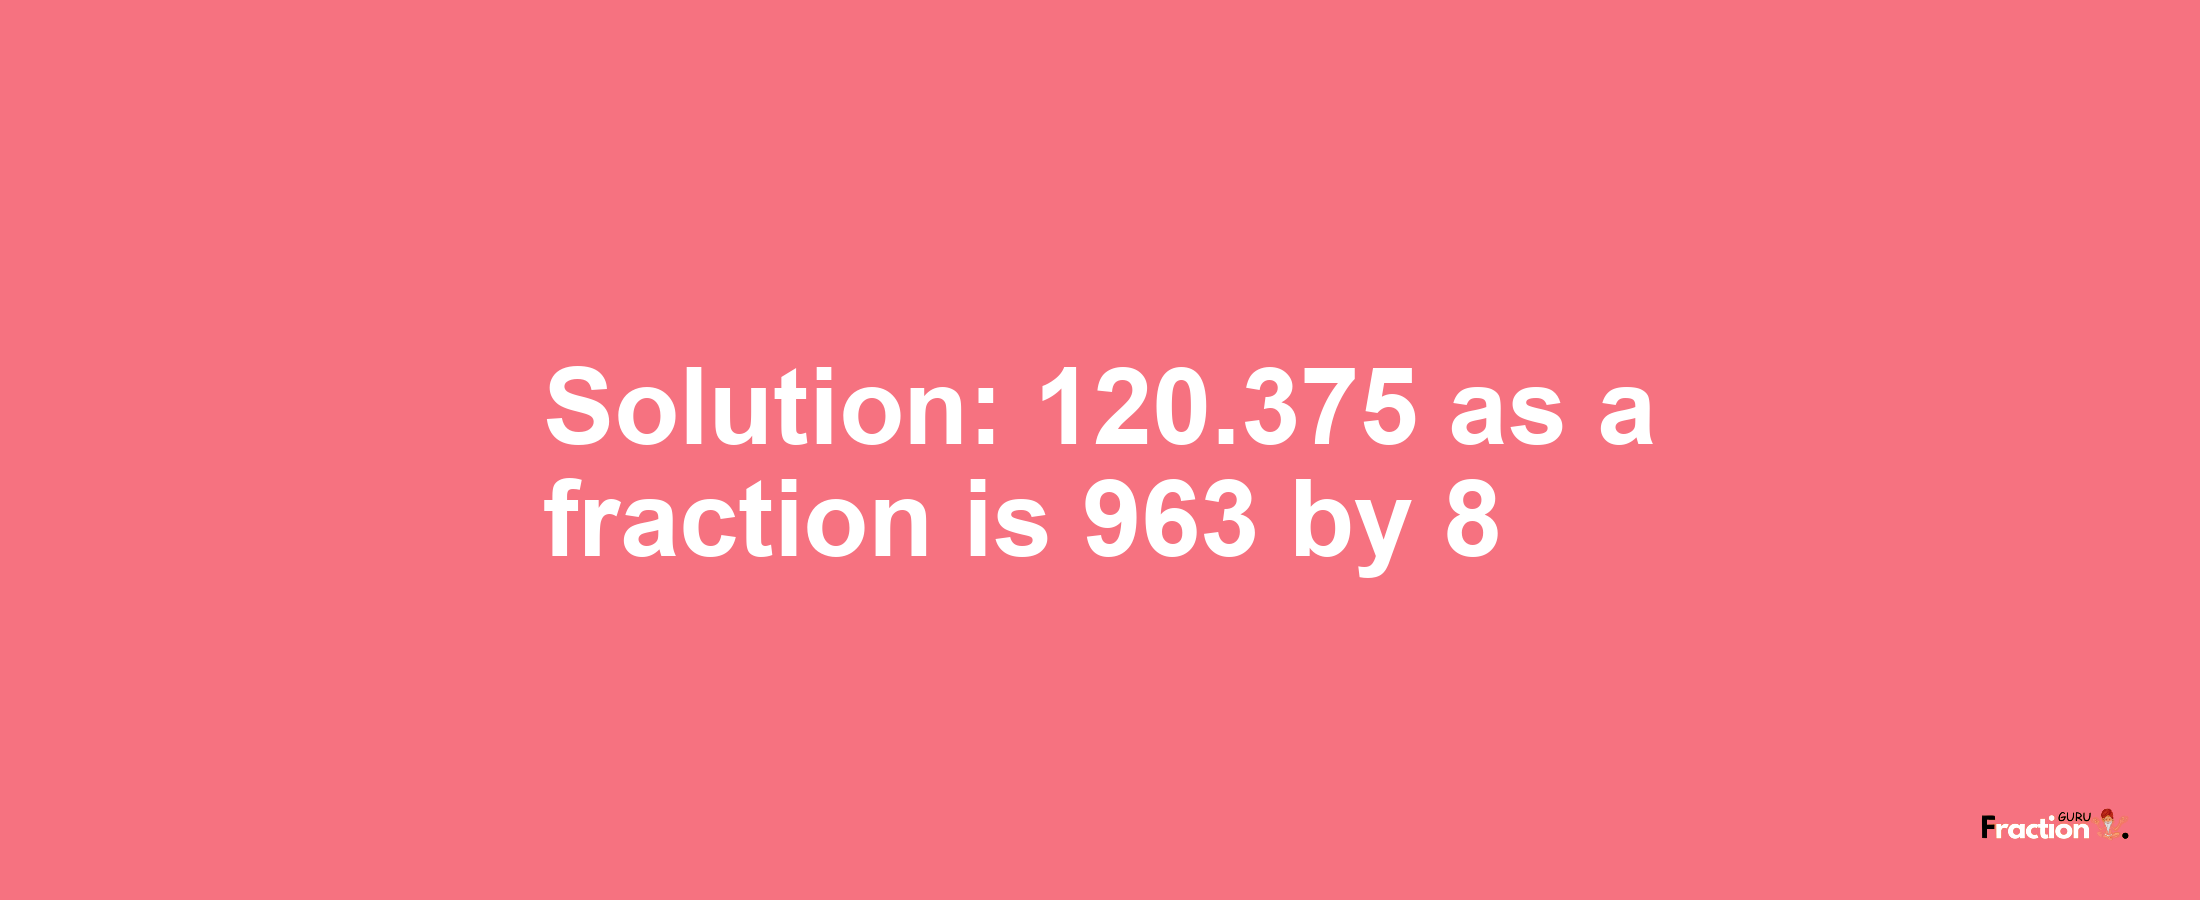 Solution:120.375 as a fraction is 963/8